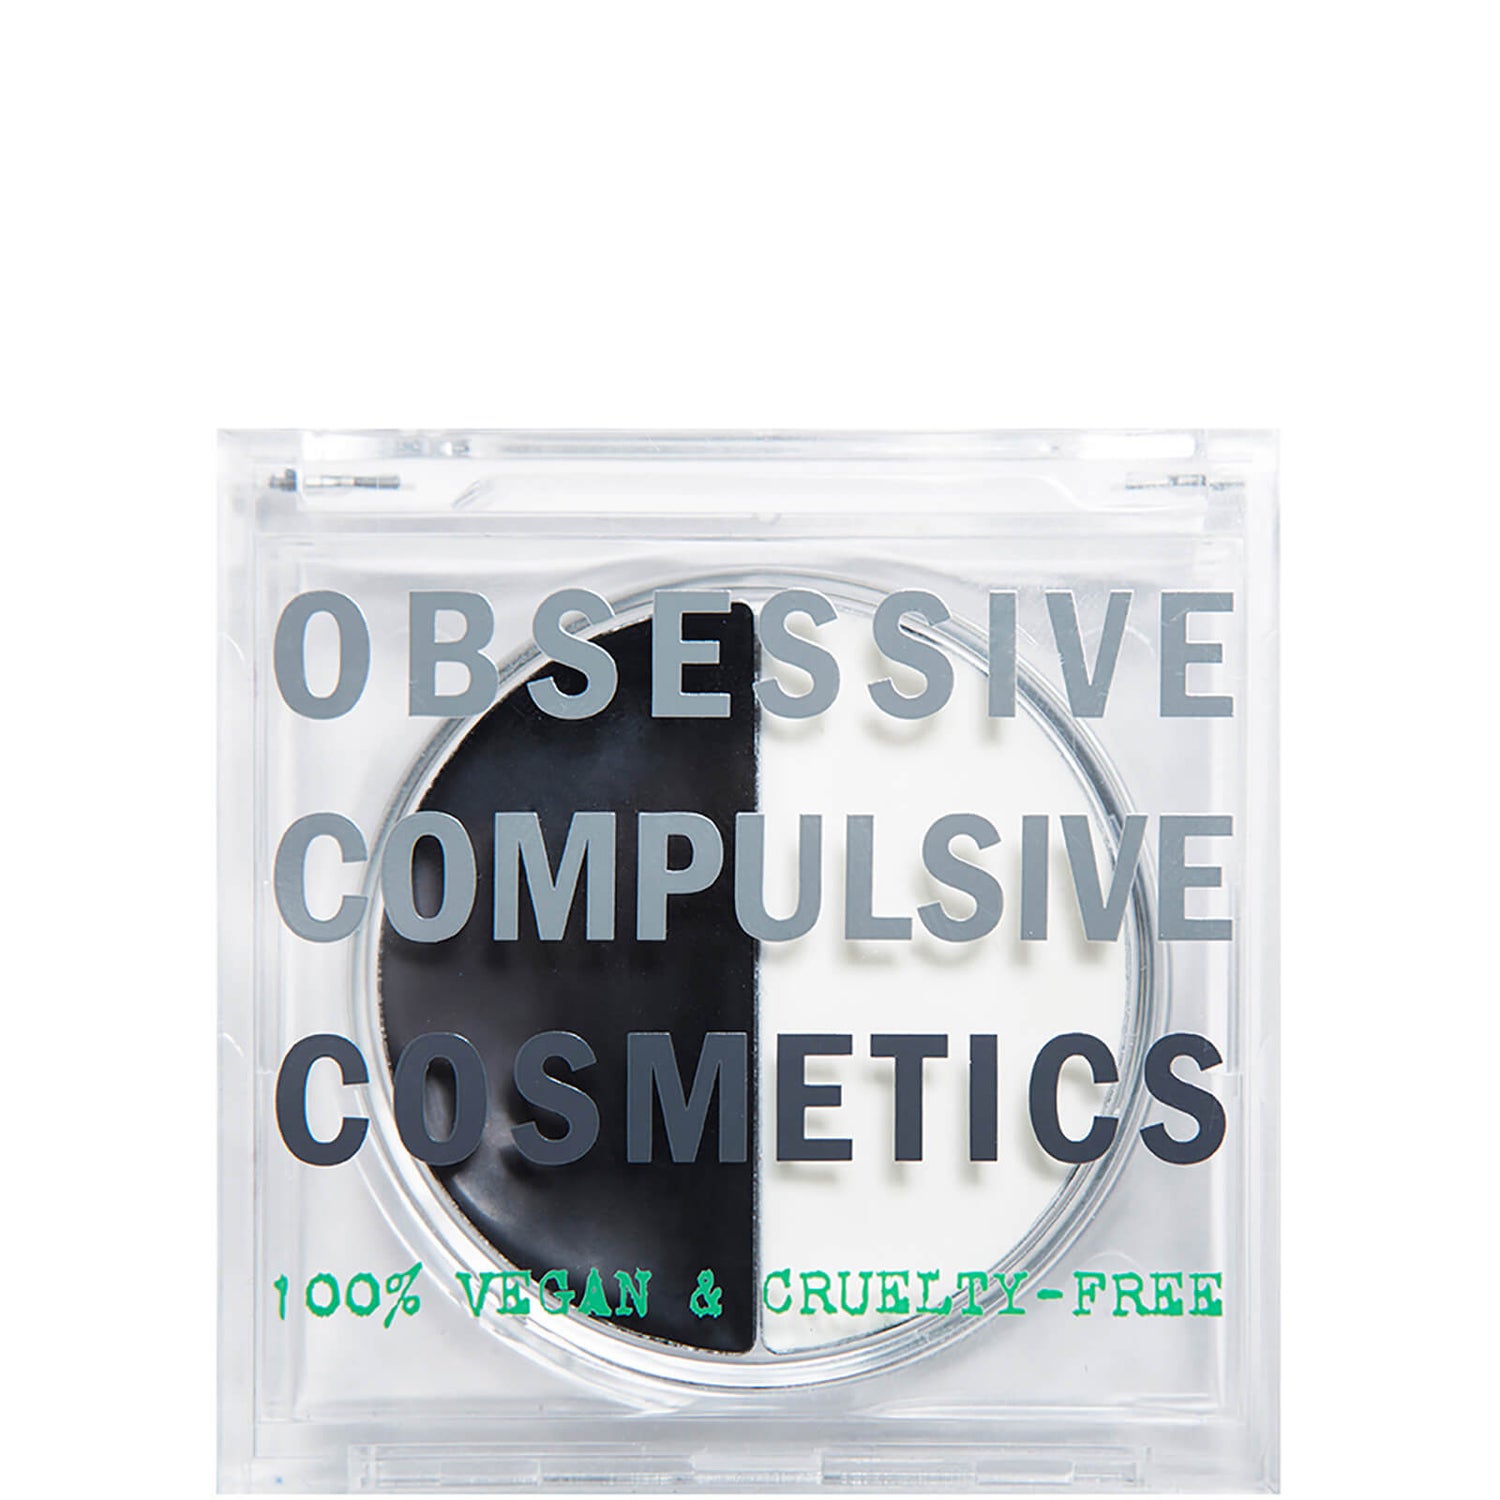 Obsessive Compulsive Cosmetics Tarred and Feathered Lip Balm Duo